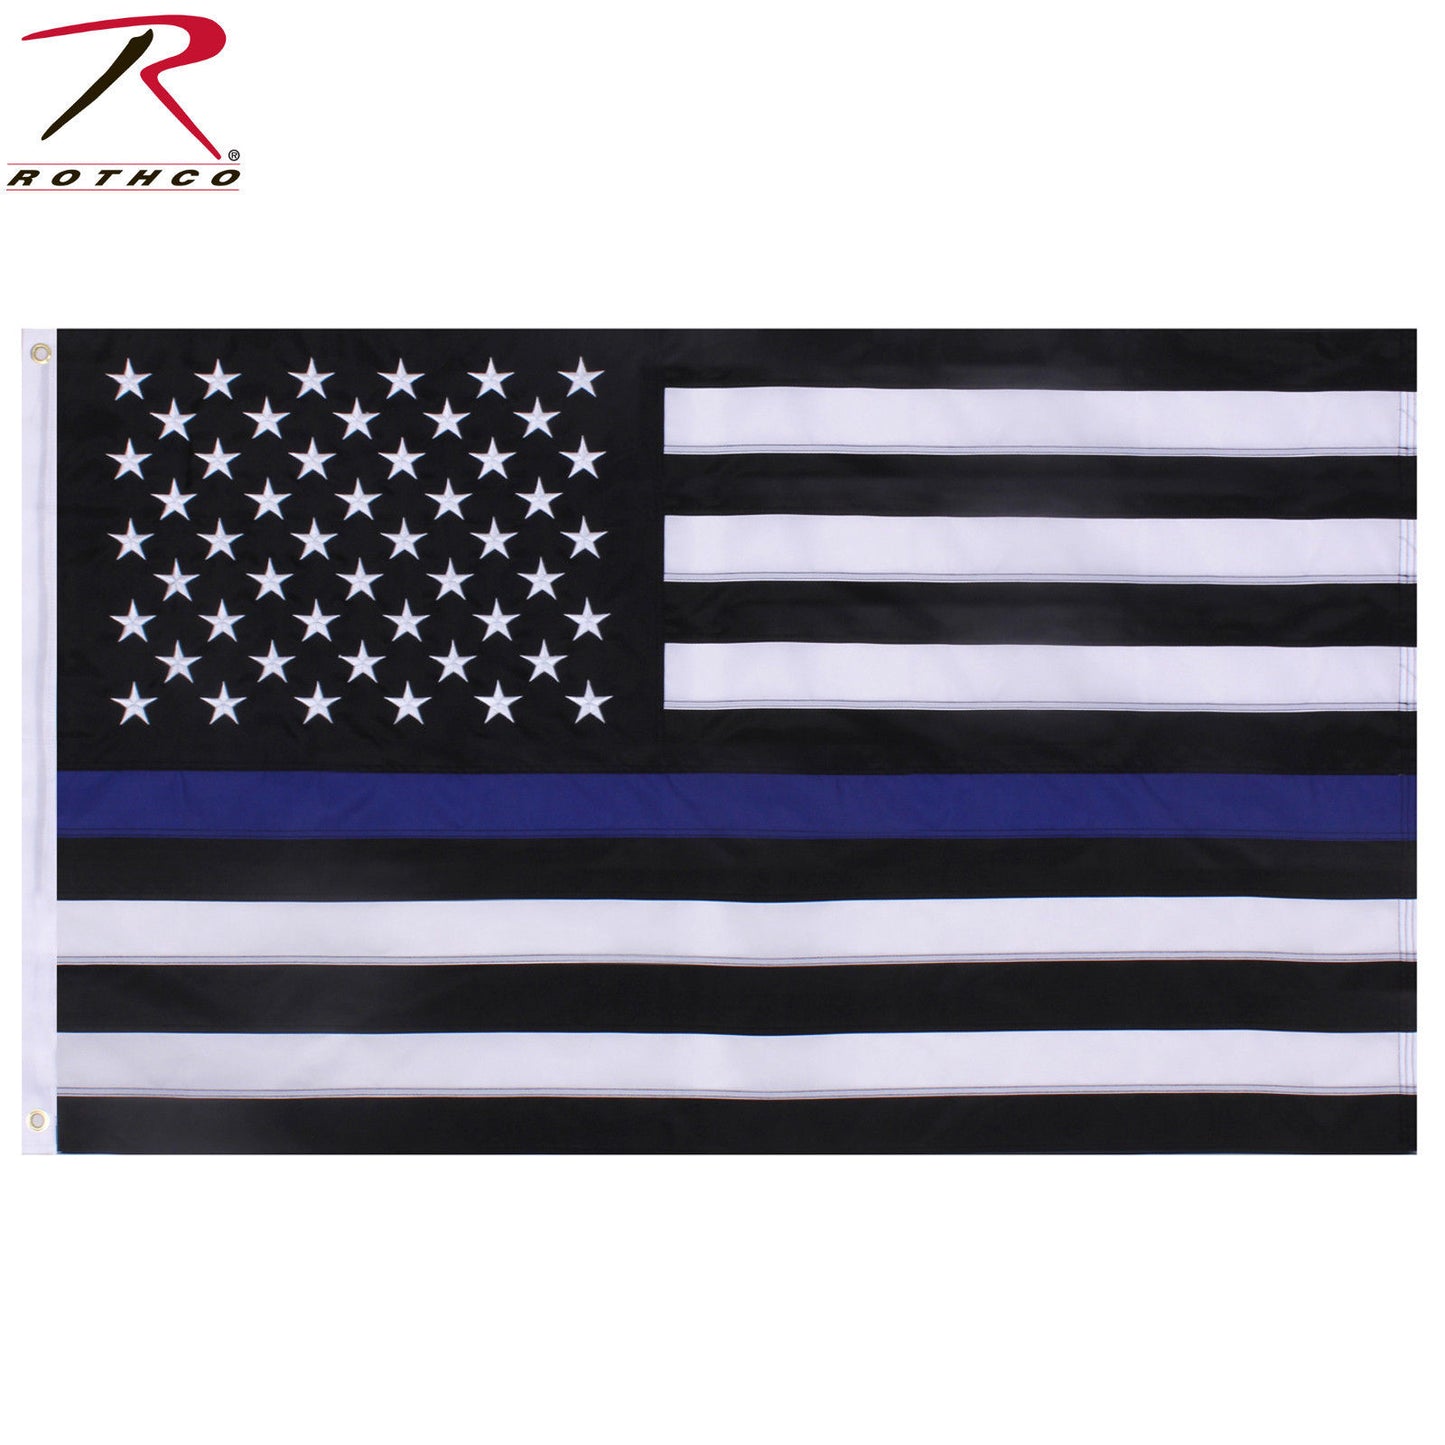 3' x 5' Embroidered Thin Blue Line U.S. Flag - Rothco TBL Deluxe American Flag